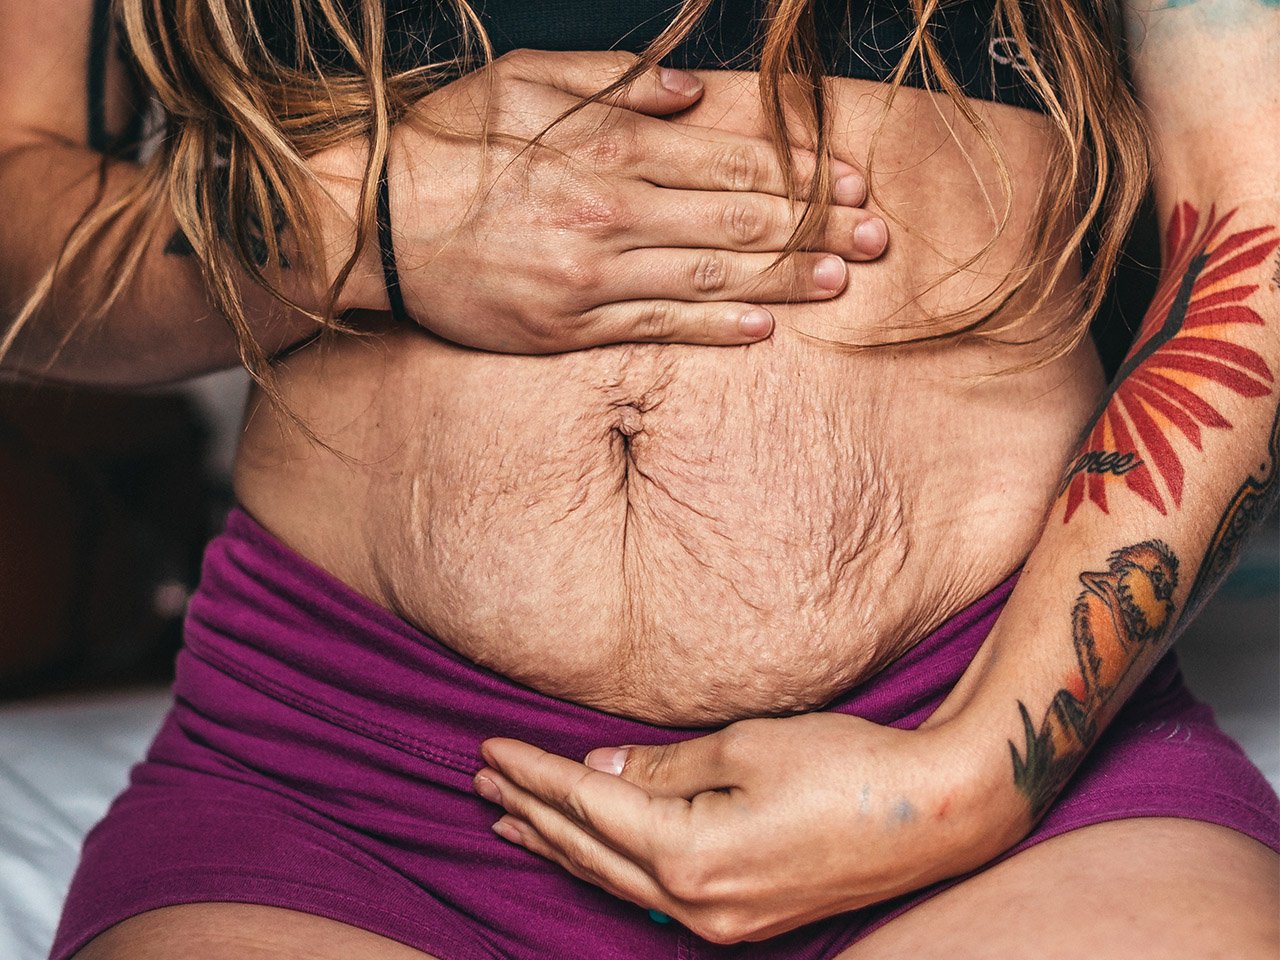 Is body positivity and shining the spotlight on scars, stretch marks